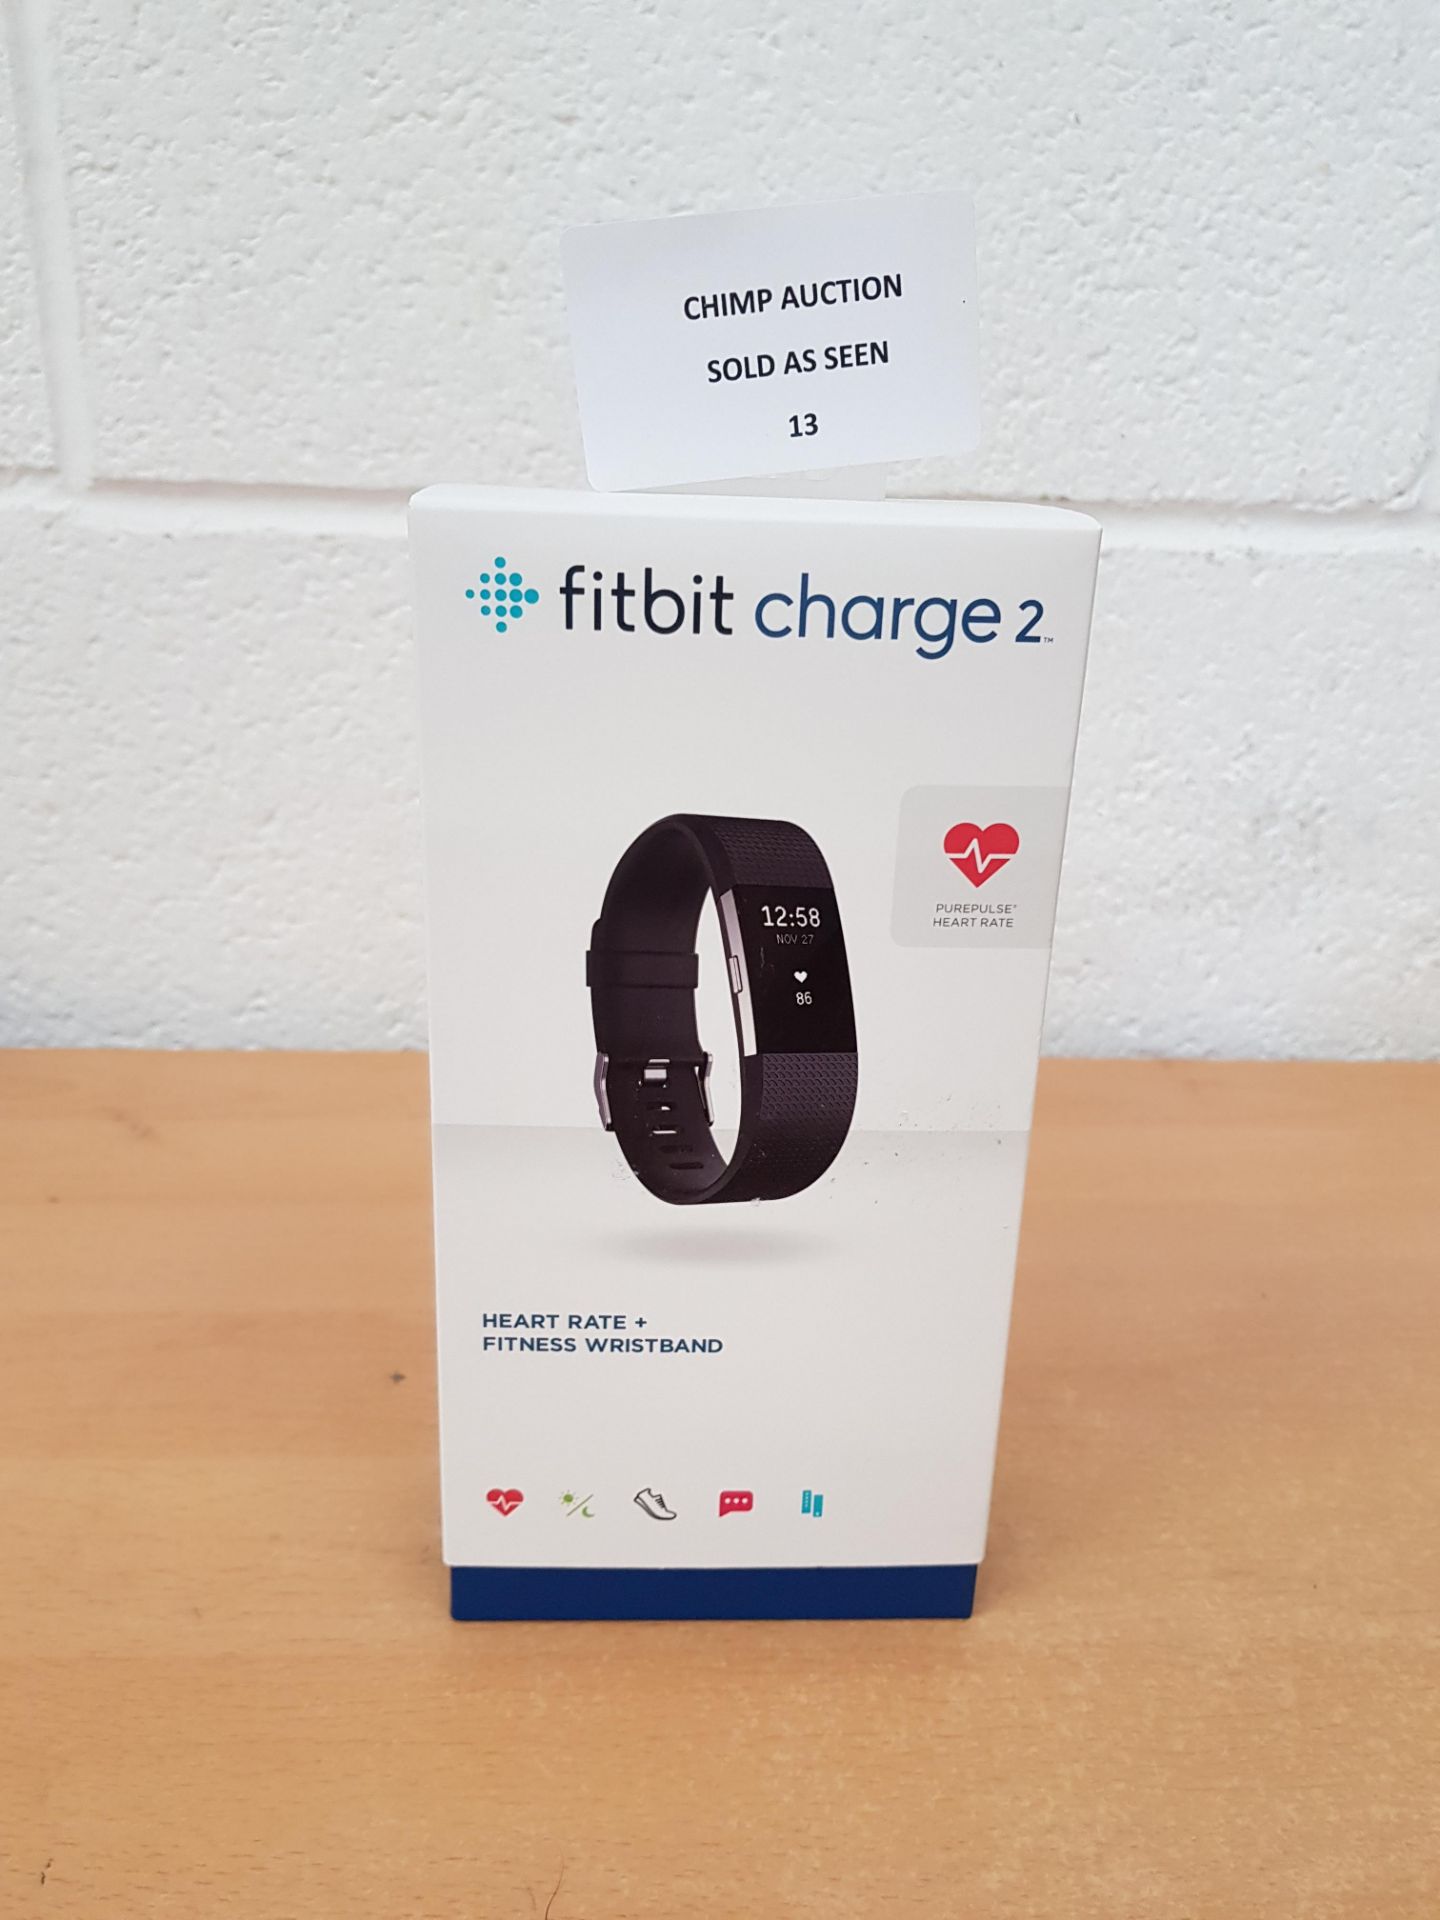 Fitbit Charge 2 Activity Tracker RRP £159.99.